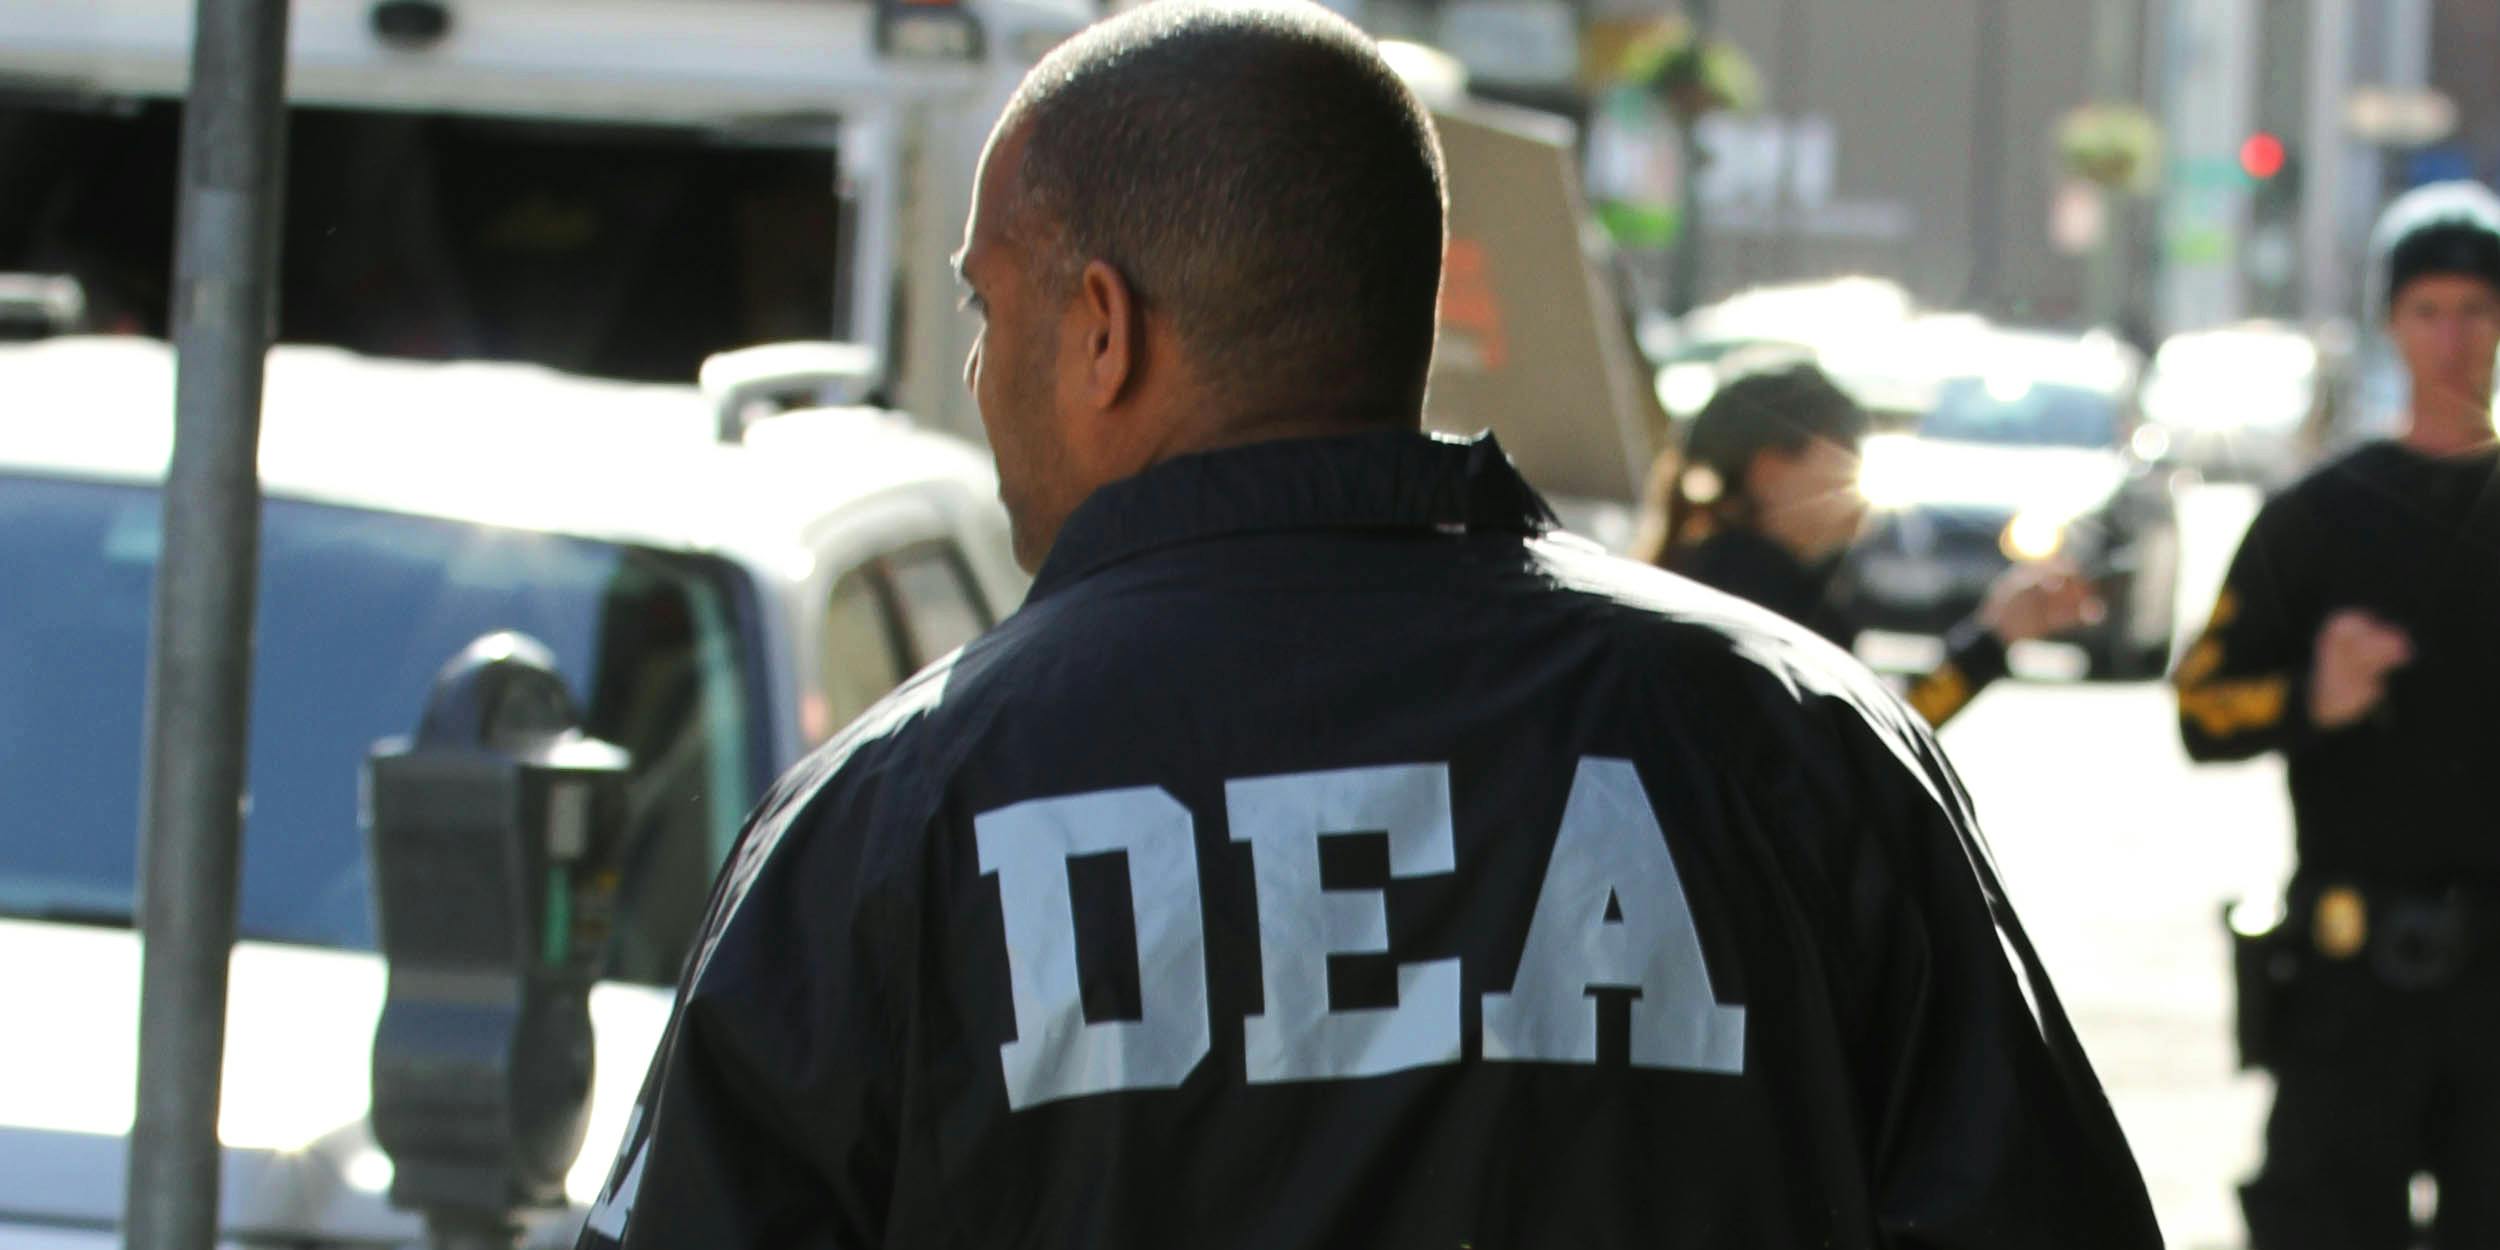 DEA agent stands with back to camera, DEA white lettering visible on jacket